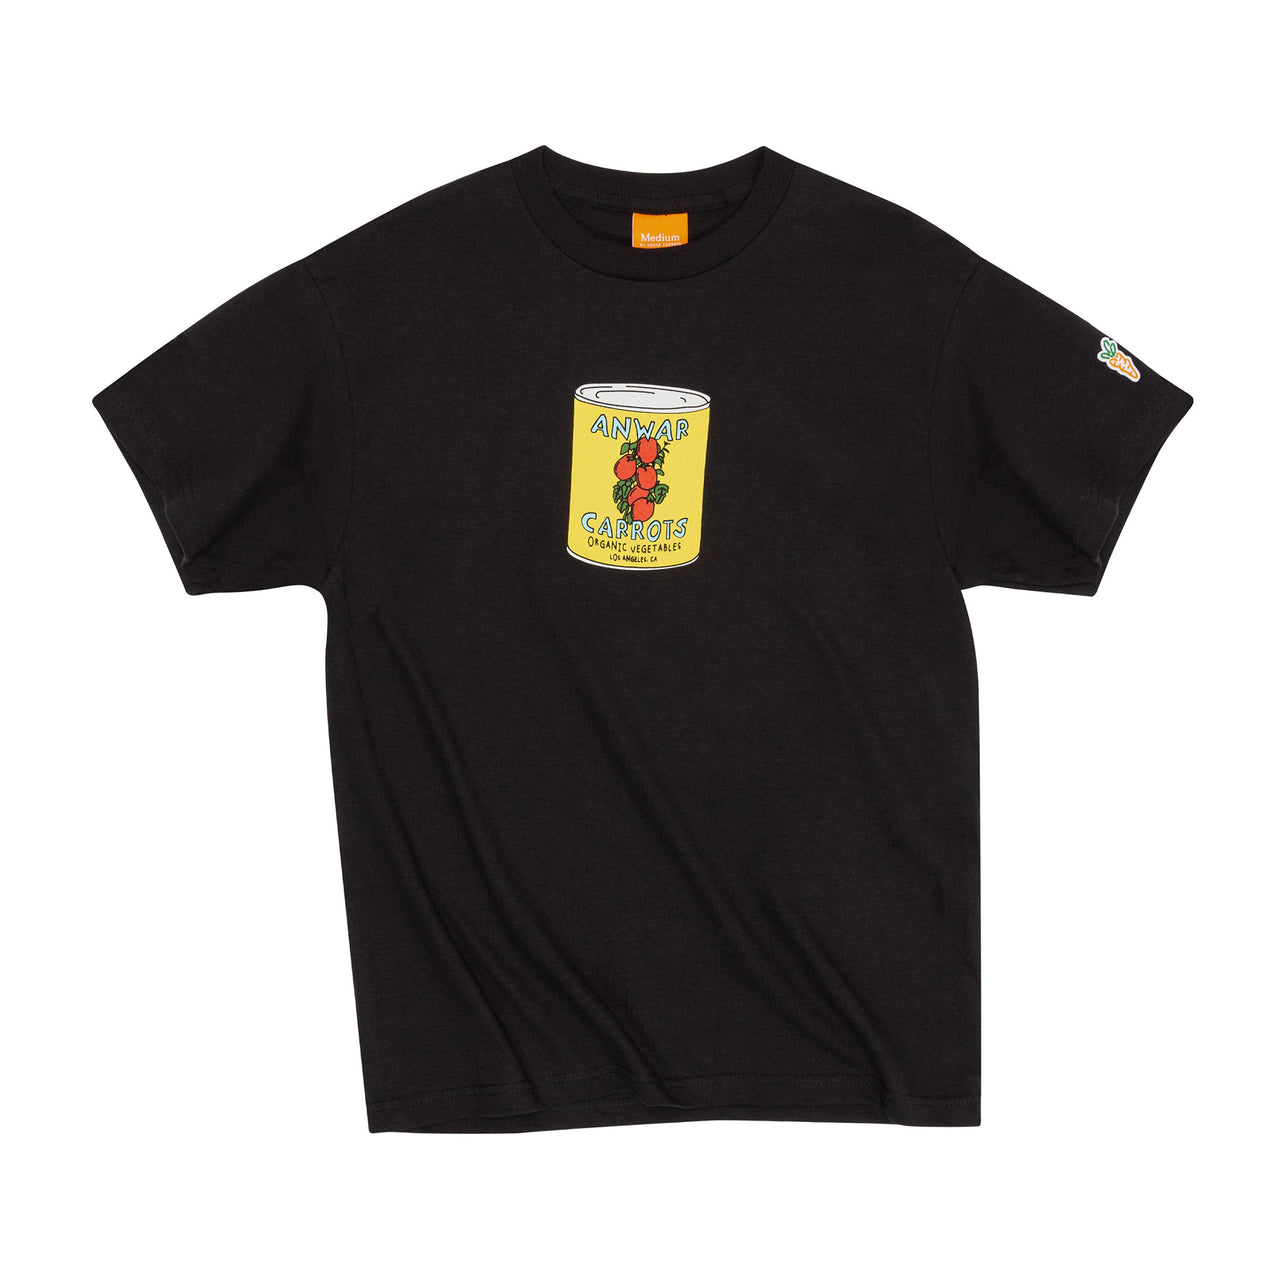 Canned T-Shirt - Black